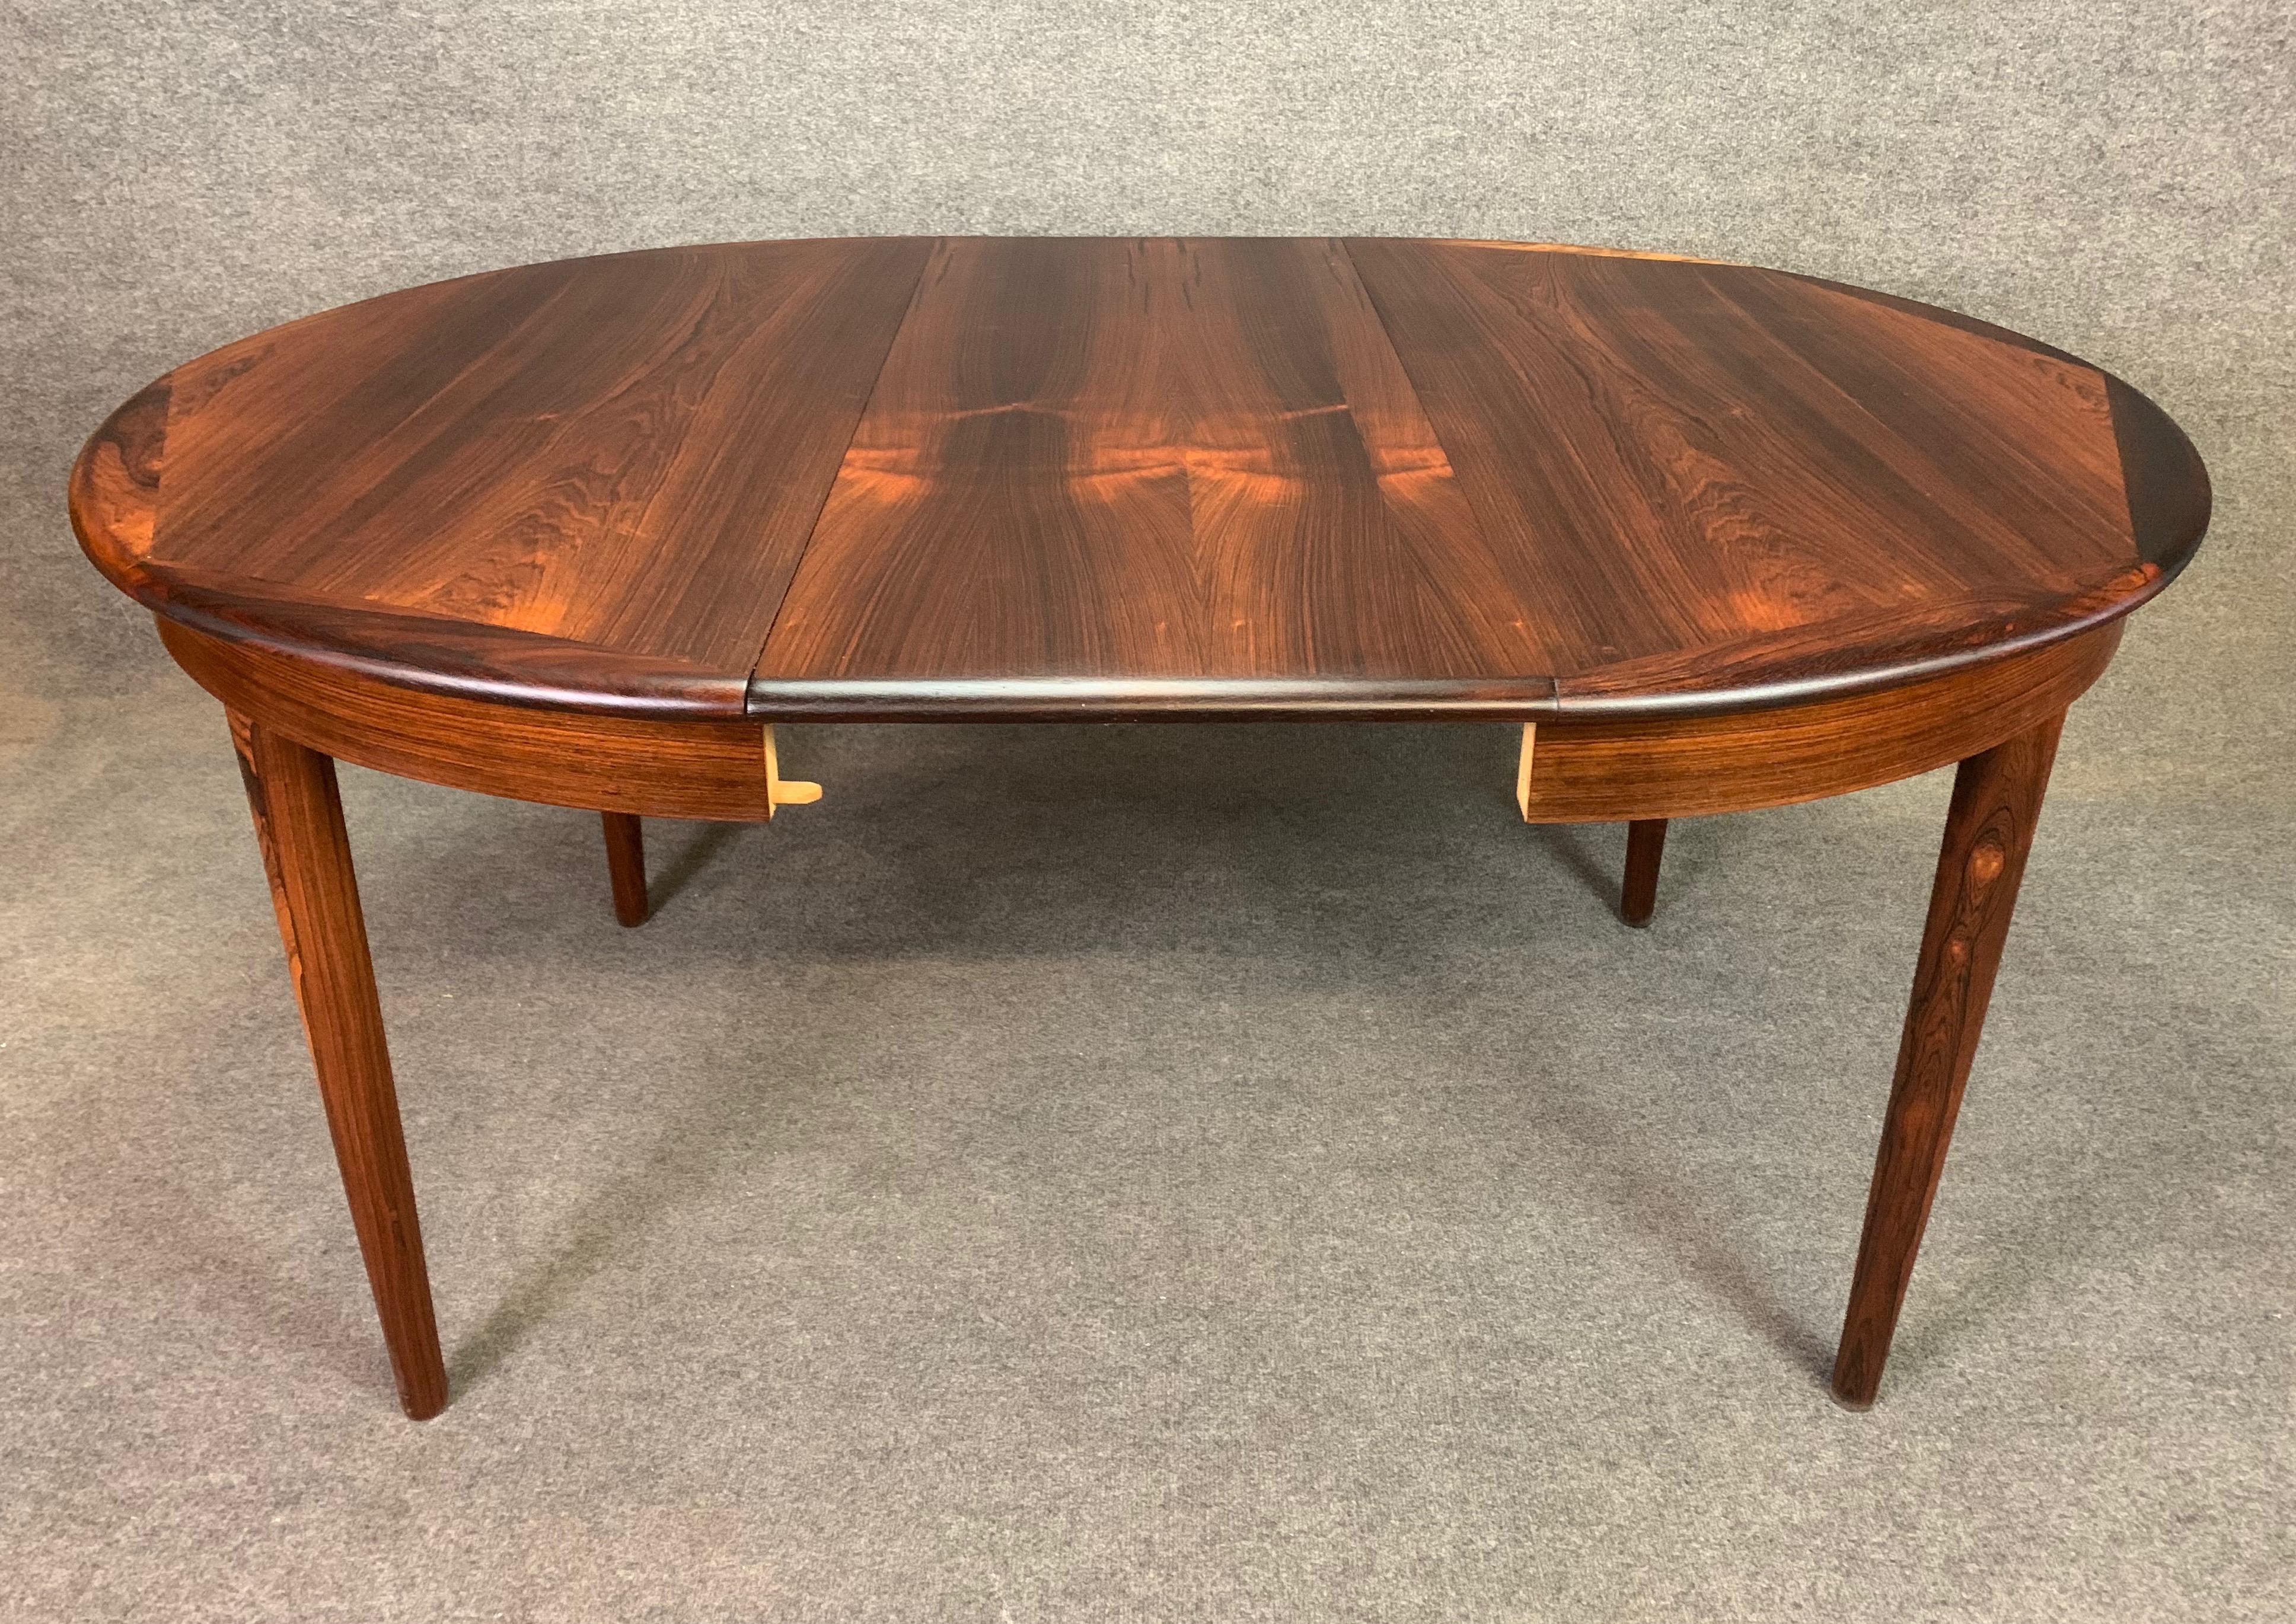 Mid-20th Century Vintage Danish Mid-Century Modern Rosewood Round Dining Table with Leaves